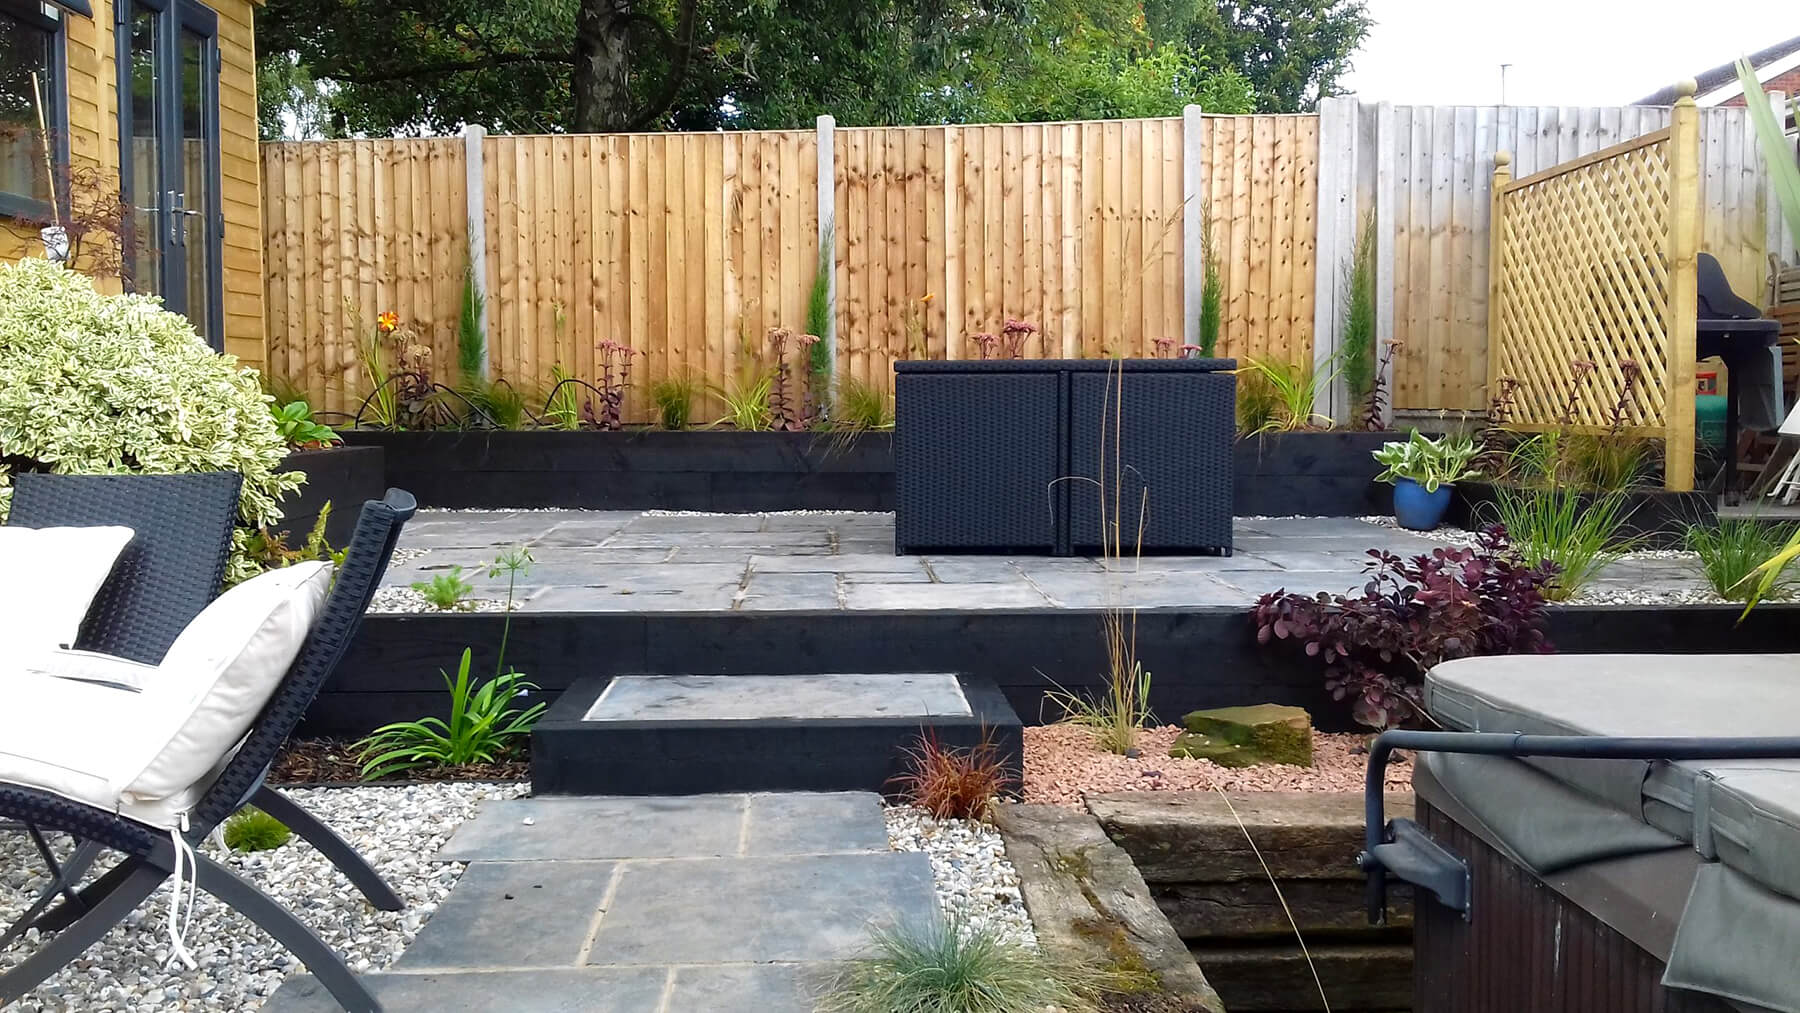 Garden Design with Patio Area and Raised Borders